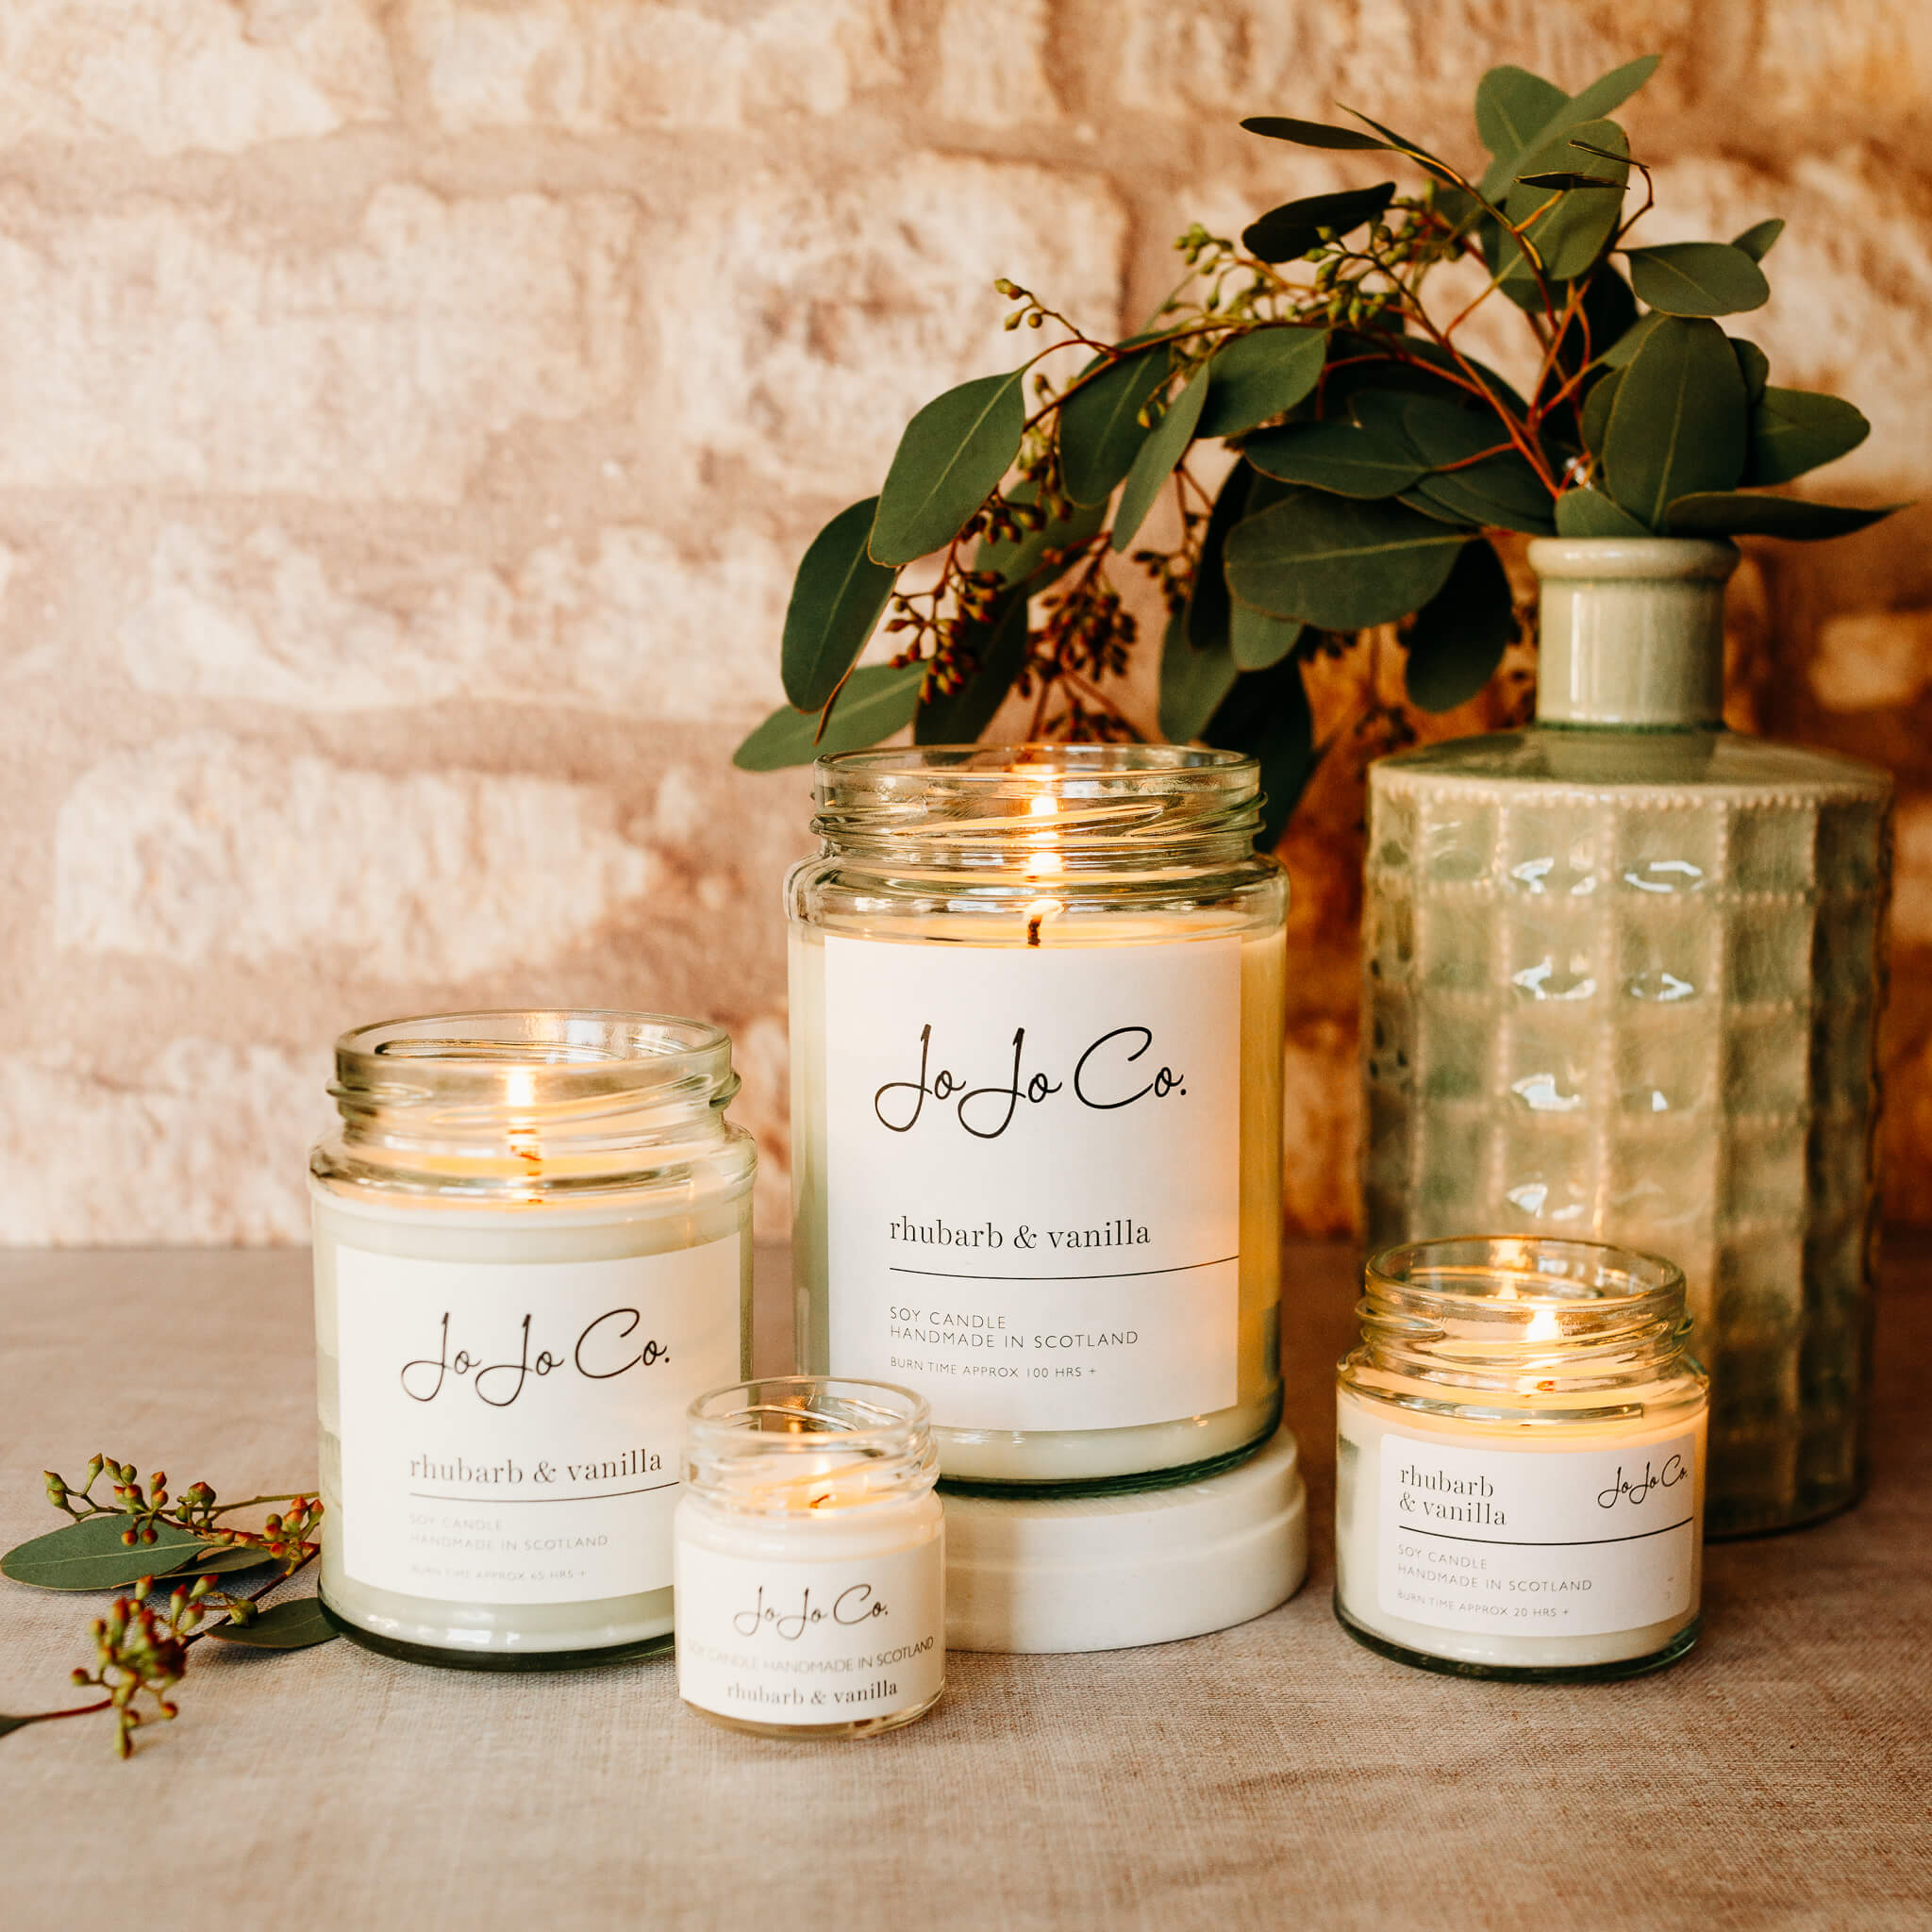 A group of JoJo Co Rhubarb Vanilla Candles in a variety of sizes